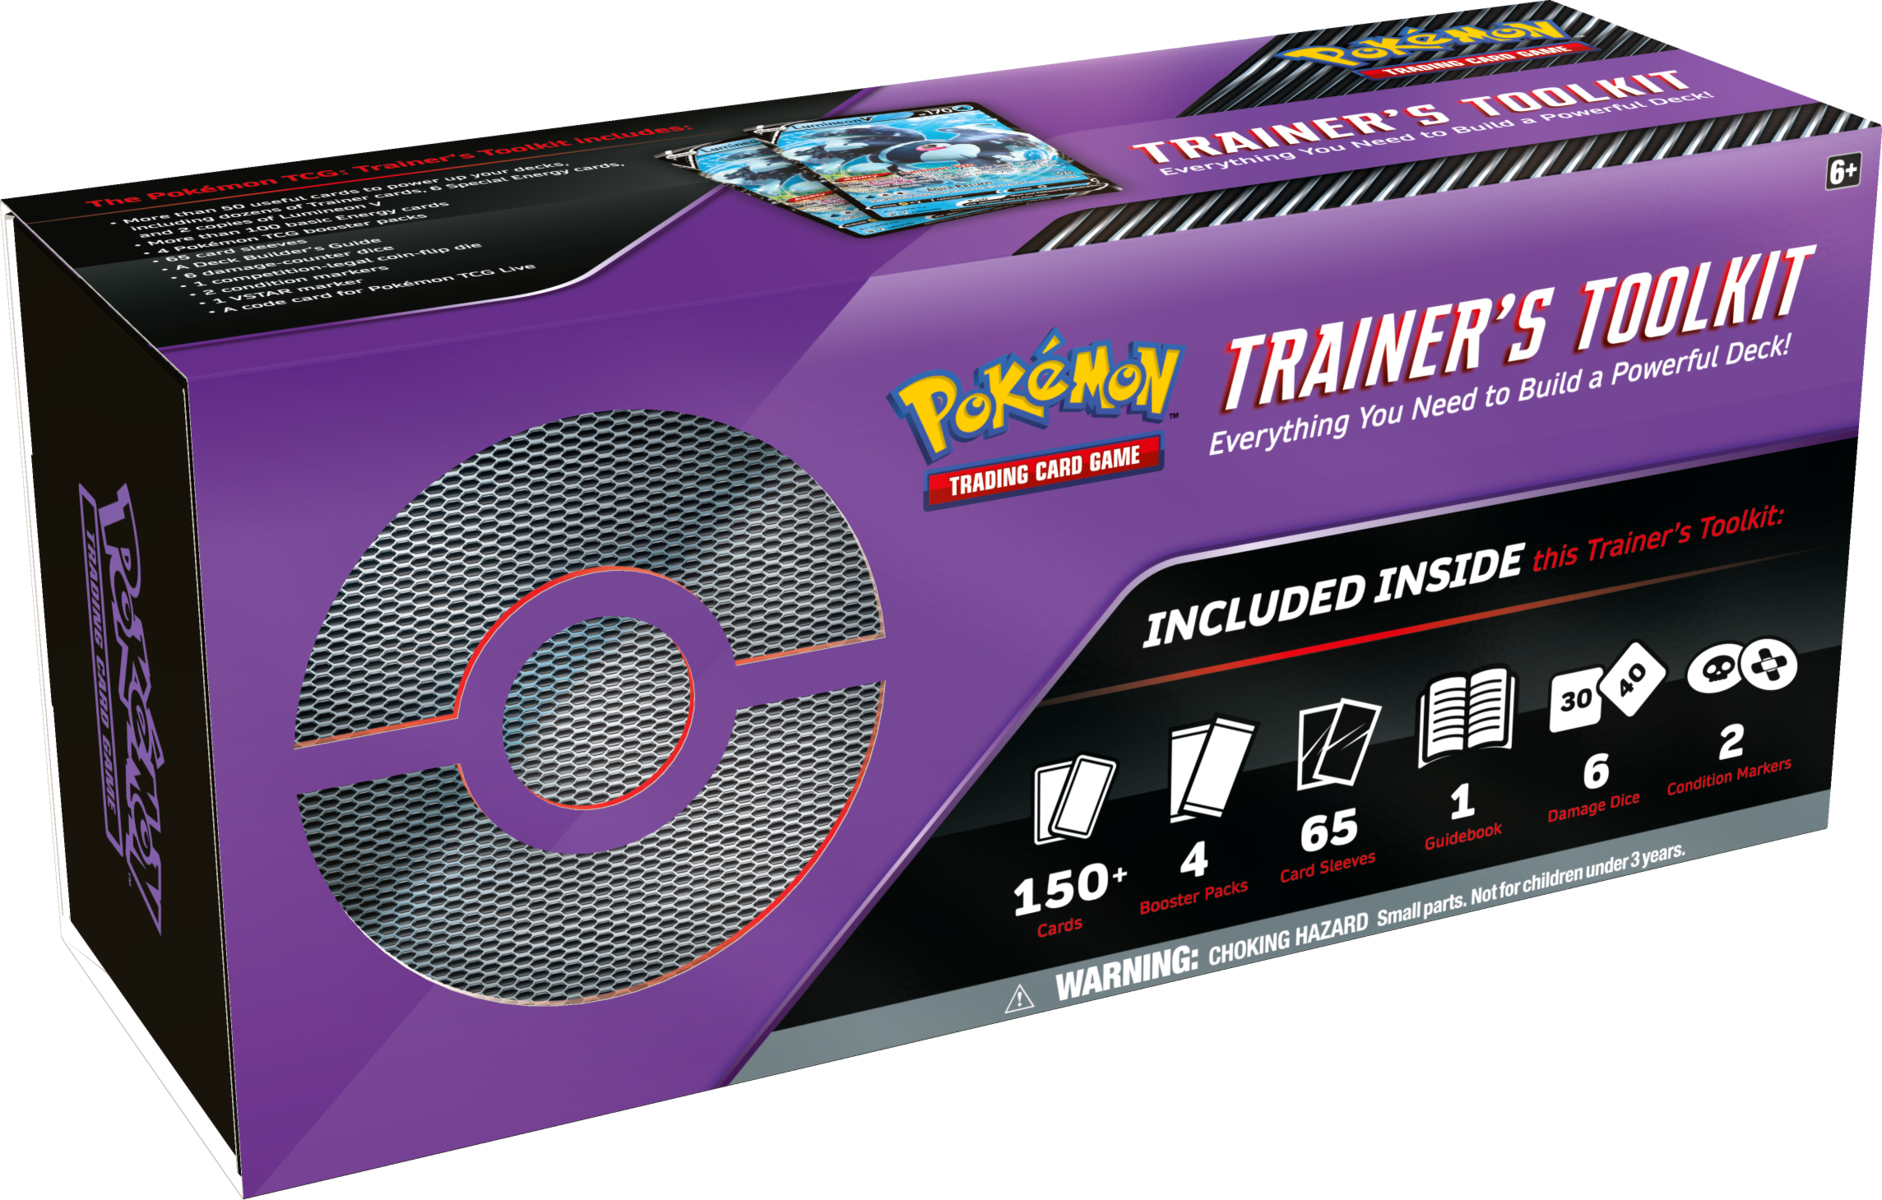 trainers toolkit 2022 contents